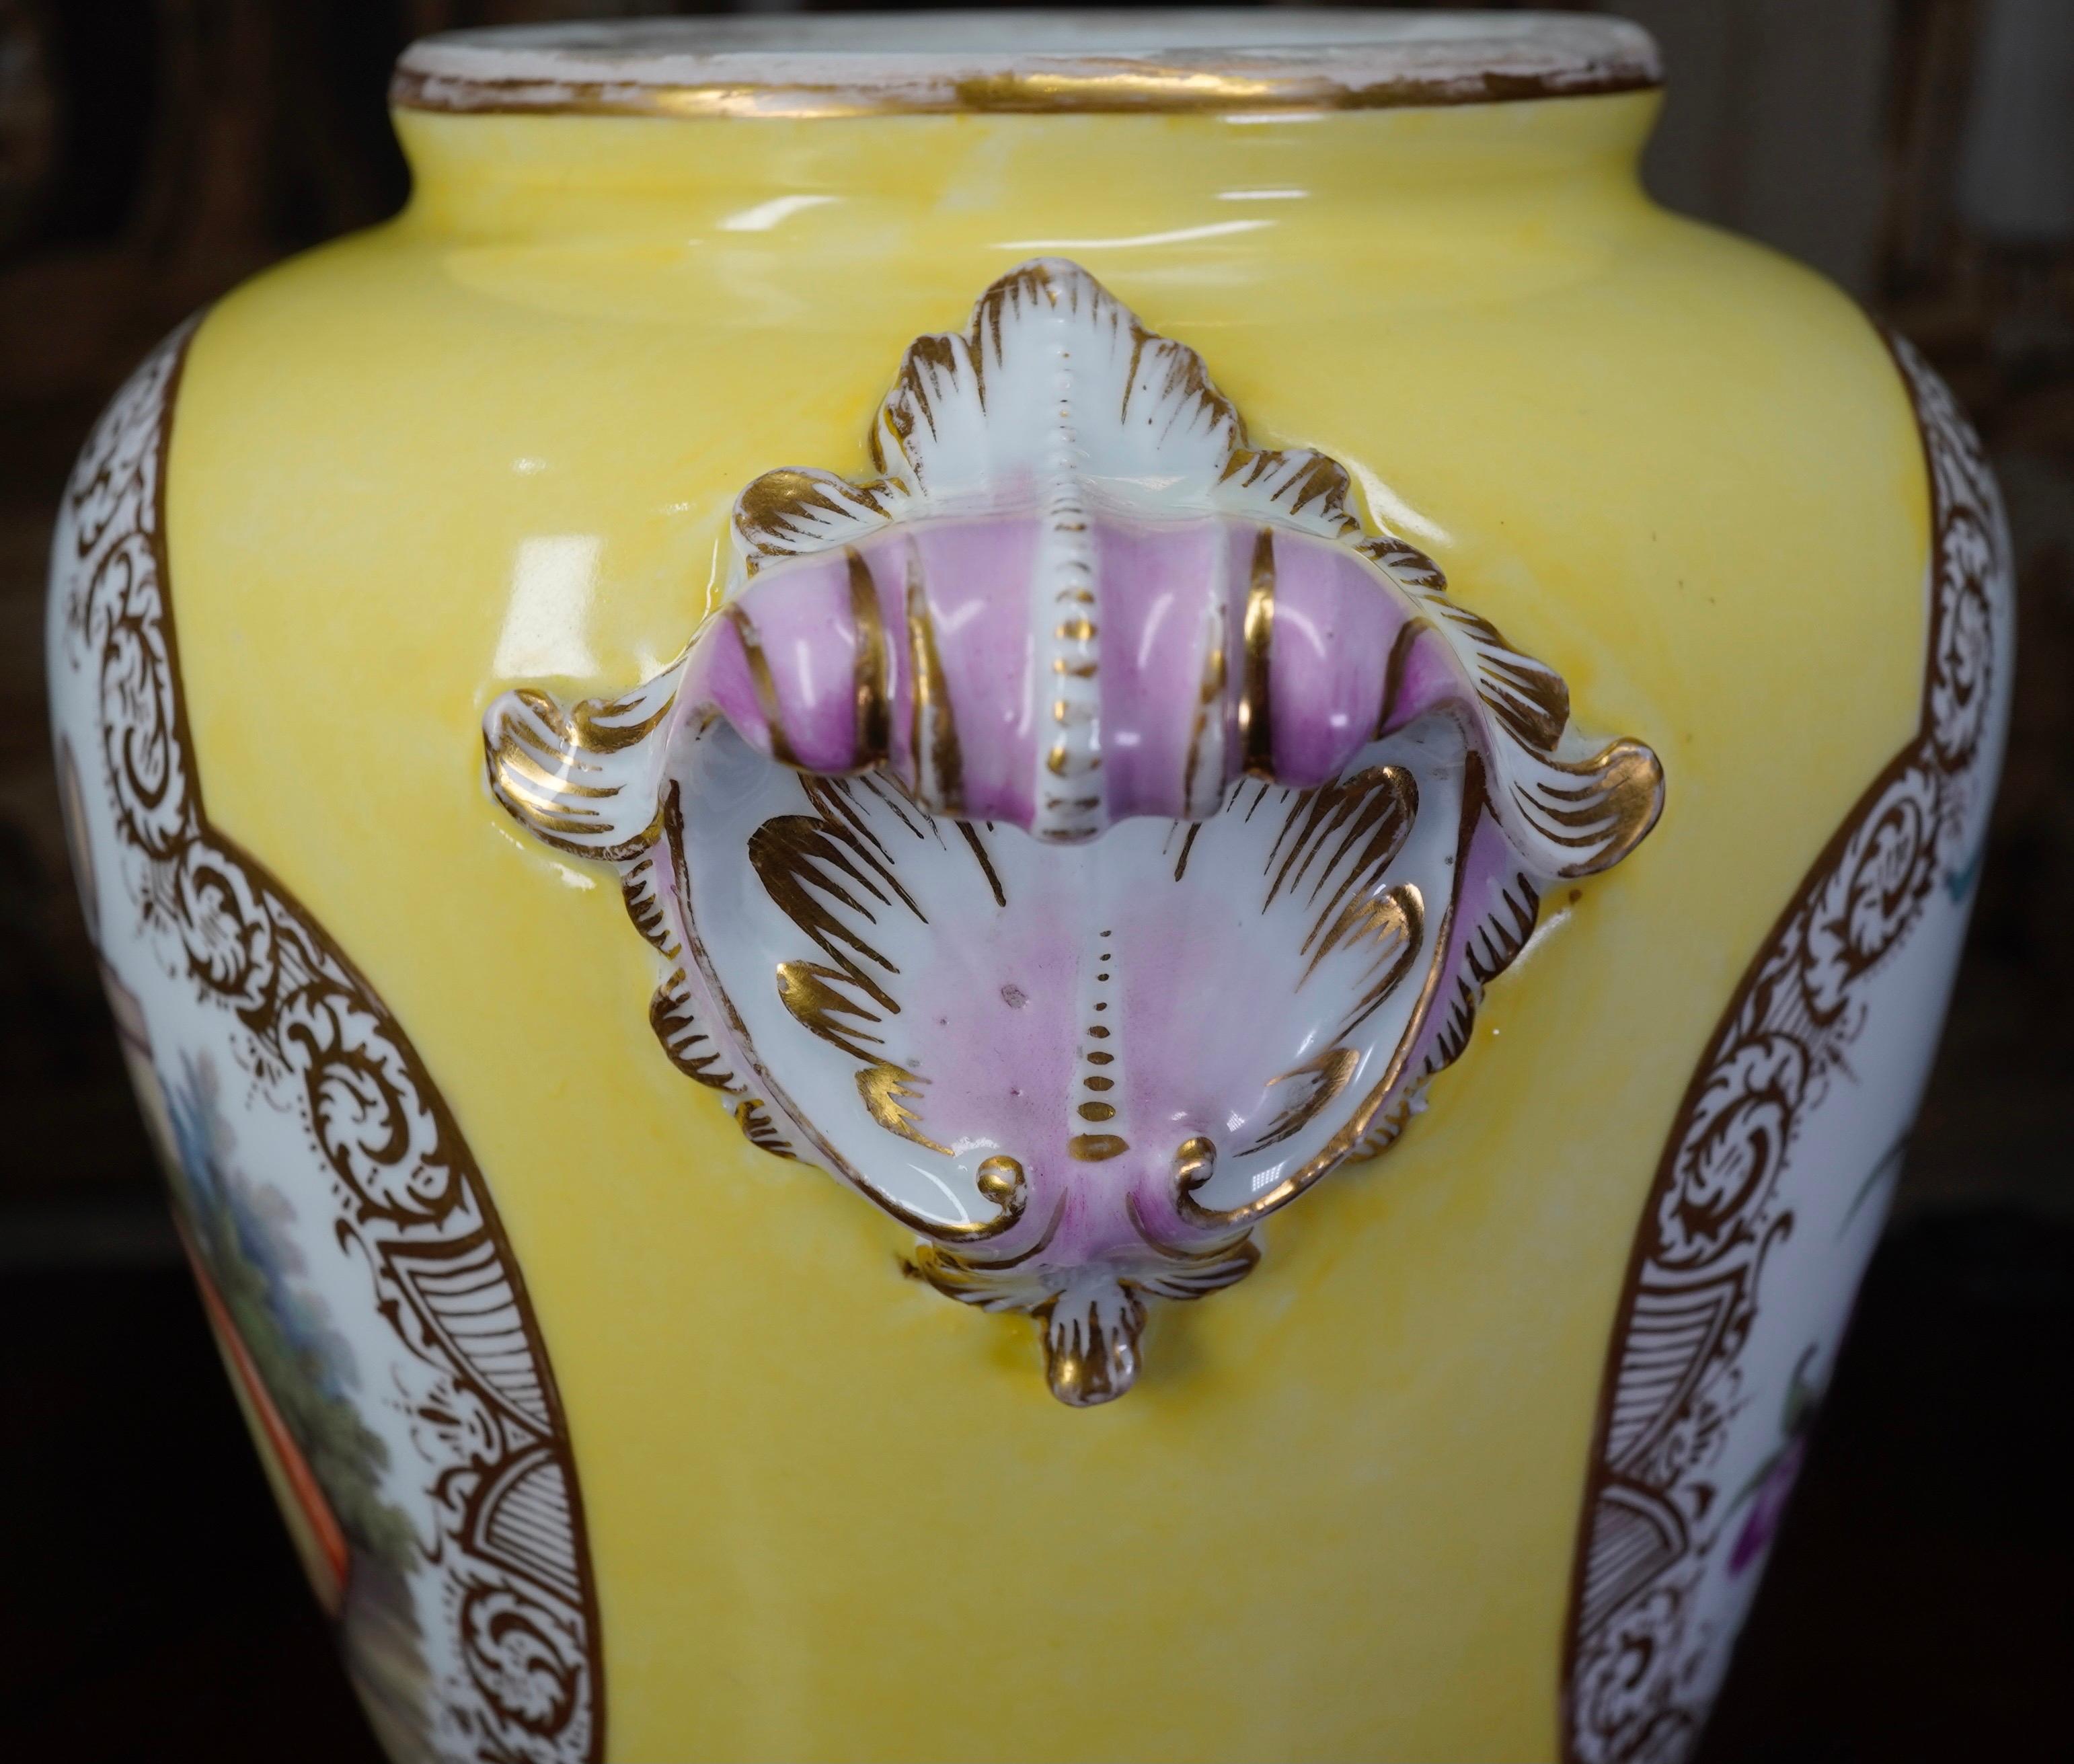 Furstenberg Vase with Fine Figure Painting, circa 1780 In Good Condition For Sale In Geelong, Victoria